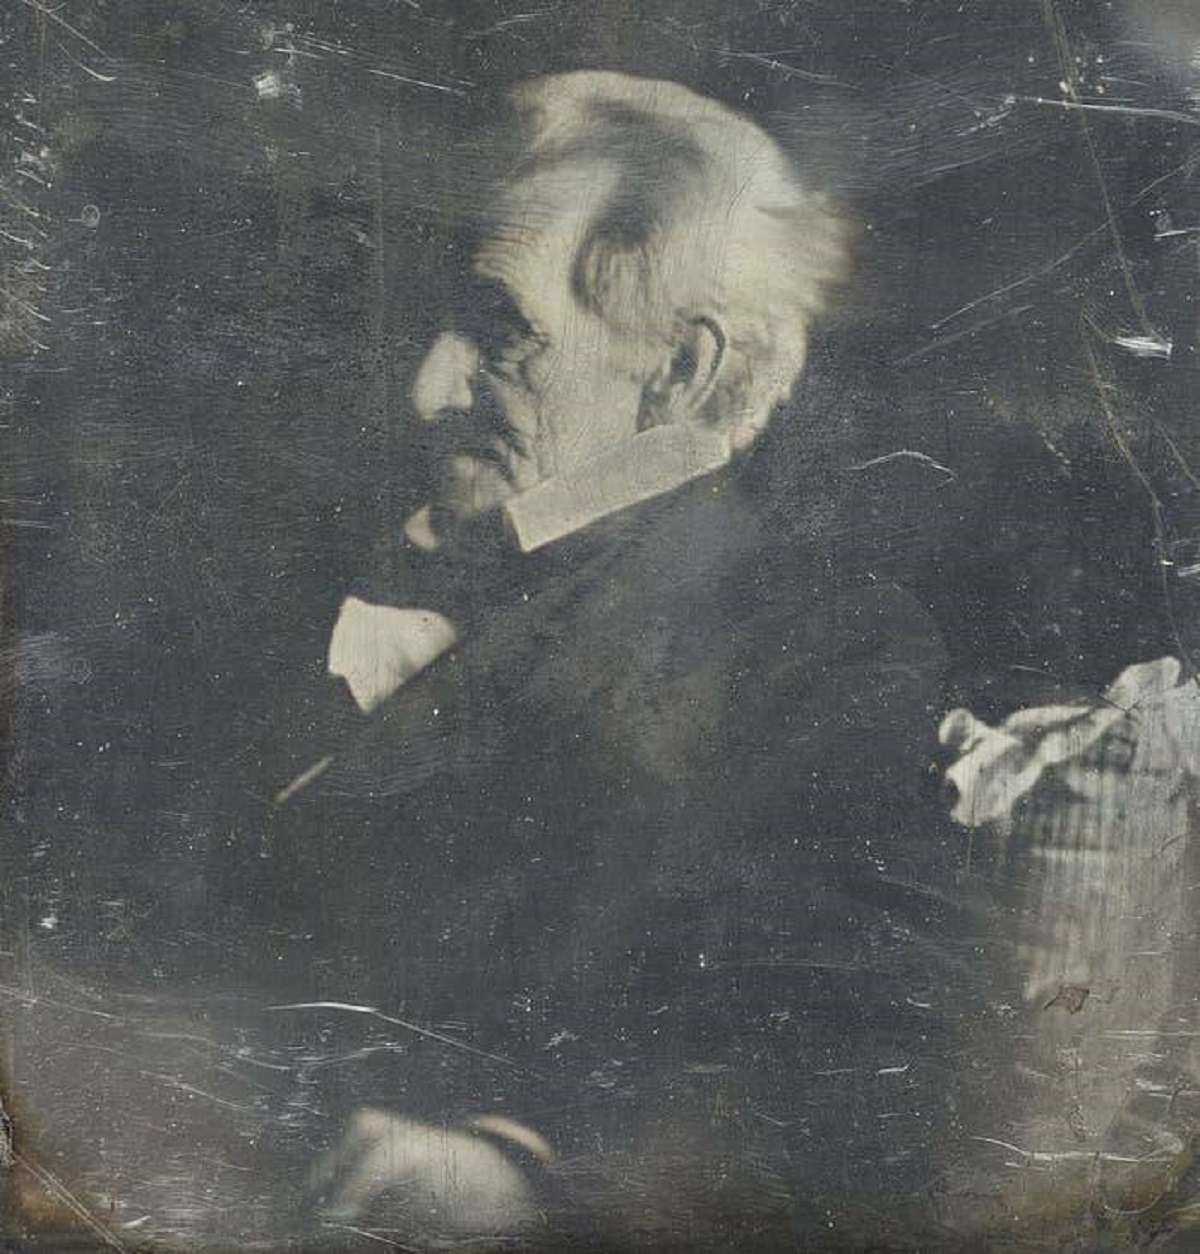 Andrew Jackson was one of the first United States presidents to be photographed. Here he is in 1844: